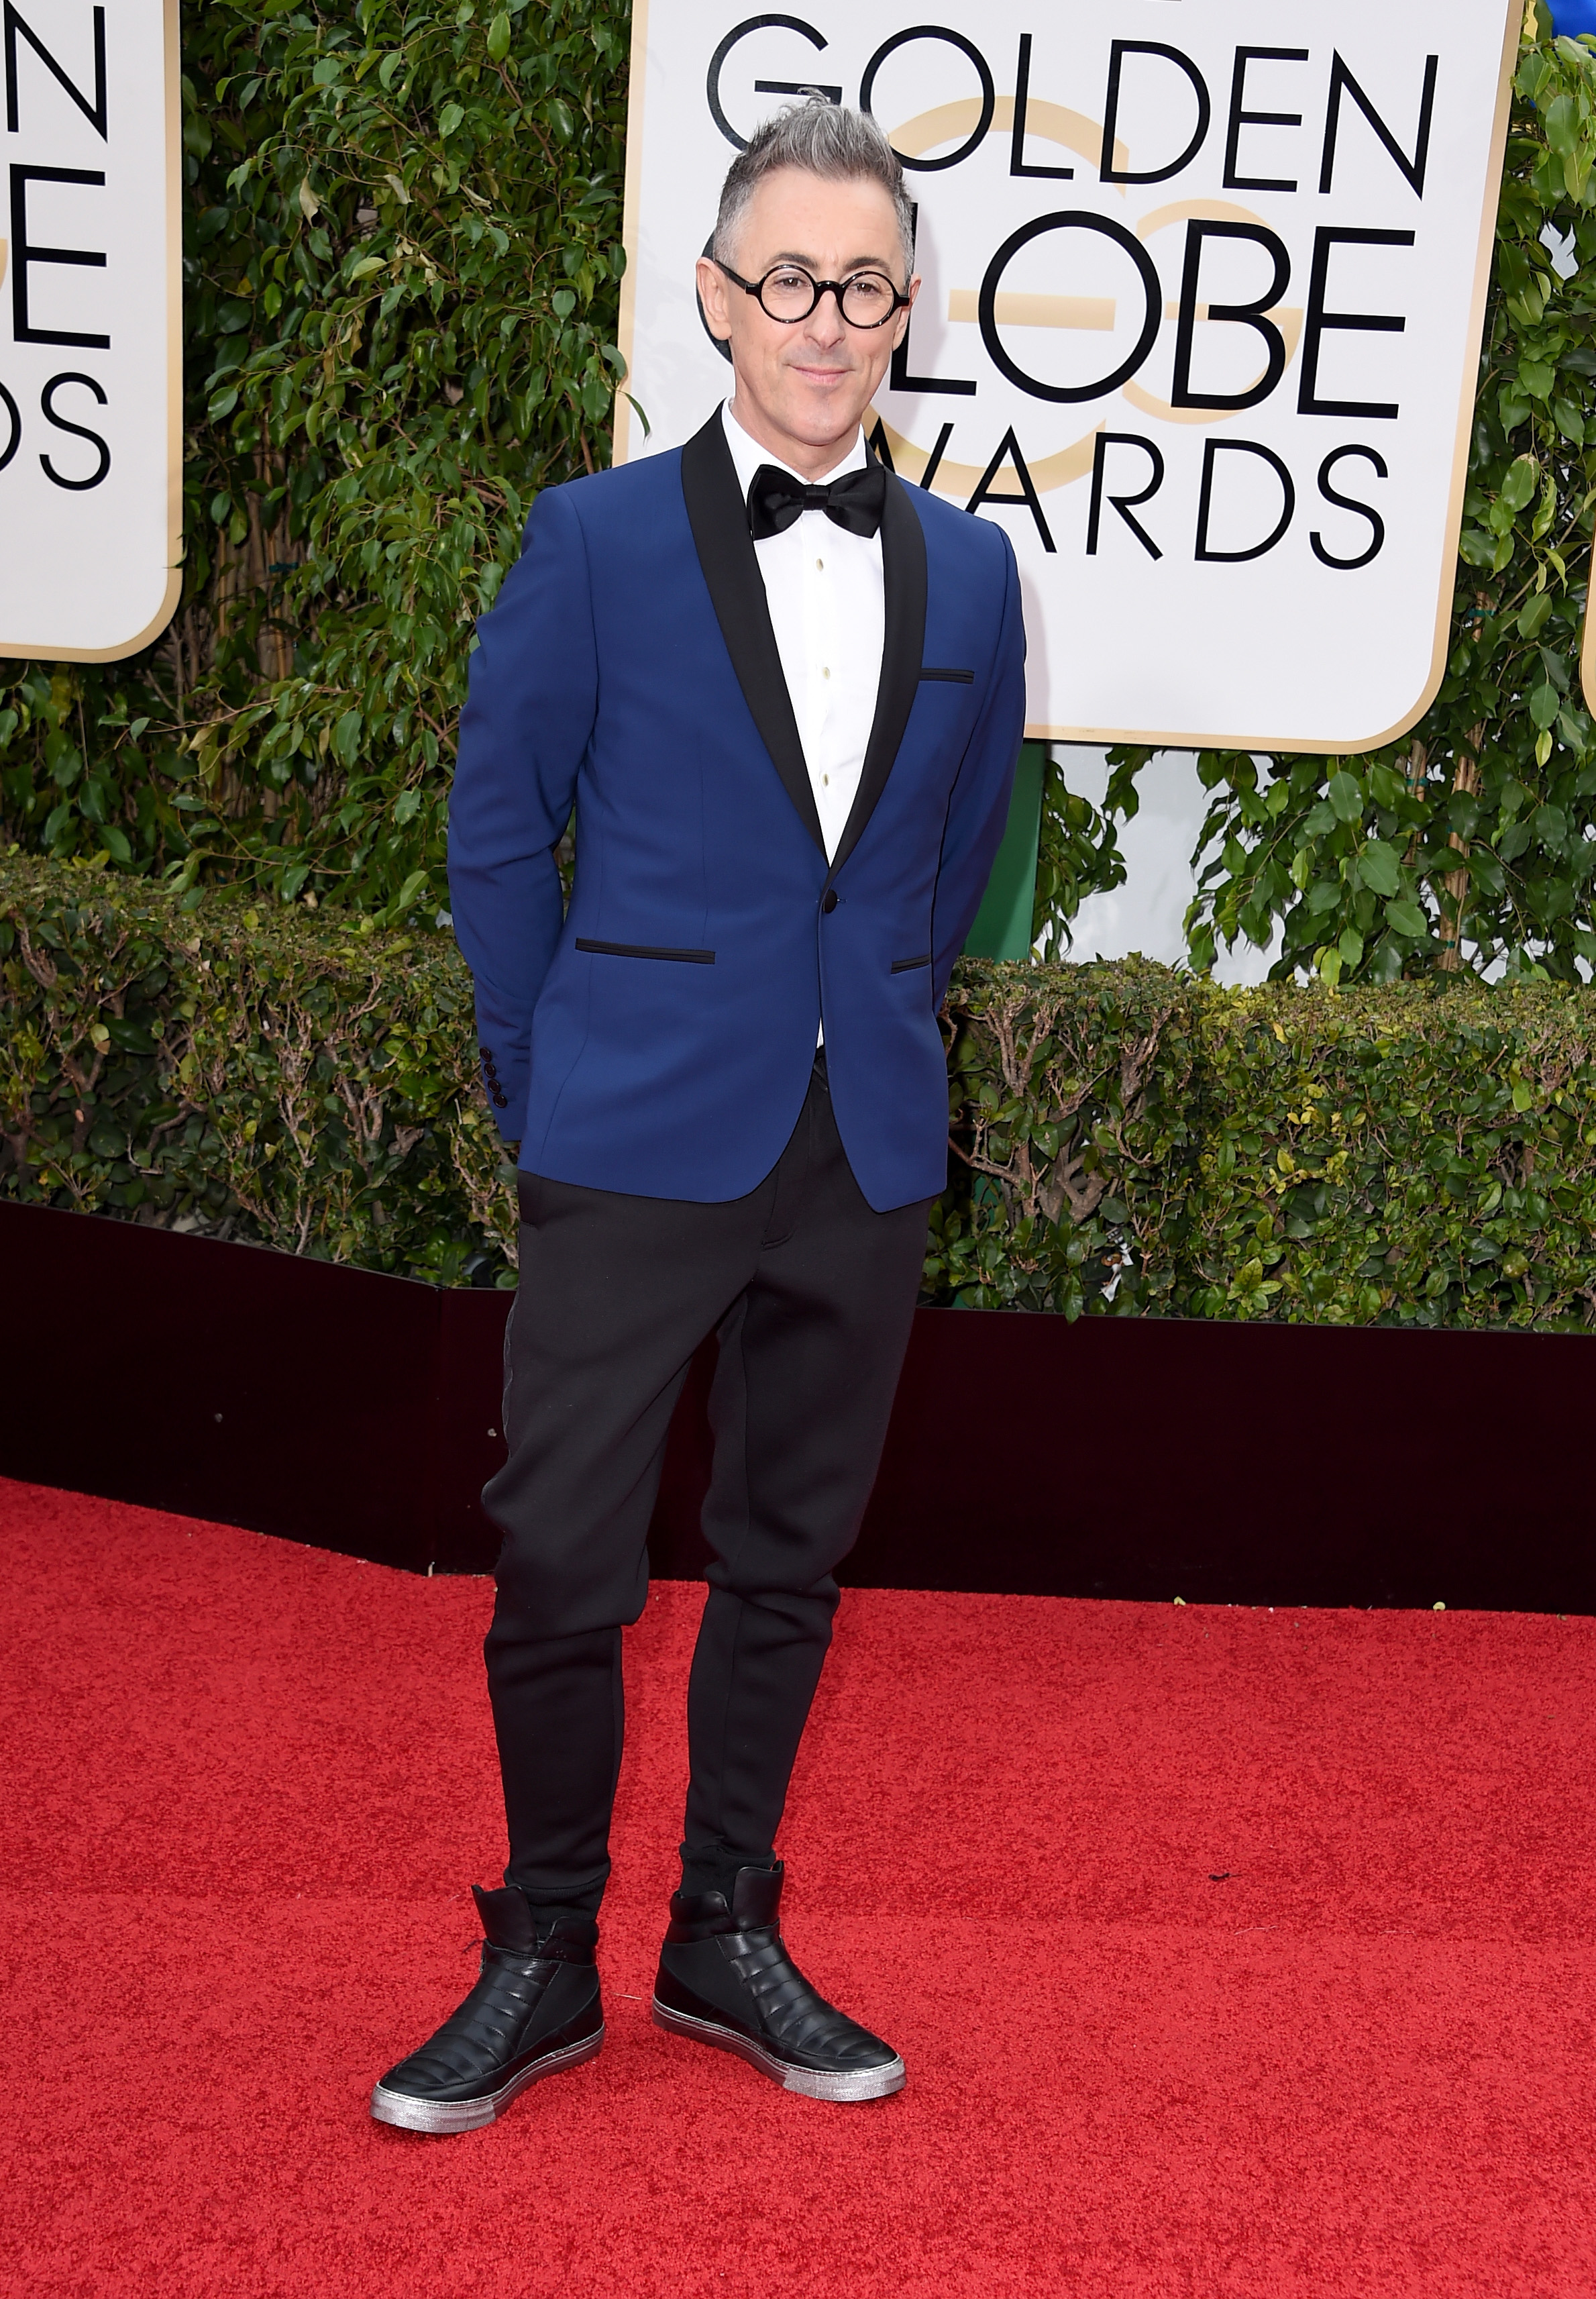 Alan Cumming arrives to the 73rd Annual Golden Globe Awards on Jan. 10, 2016 in Beverly Hills.